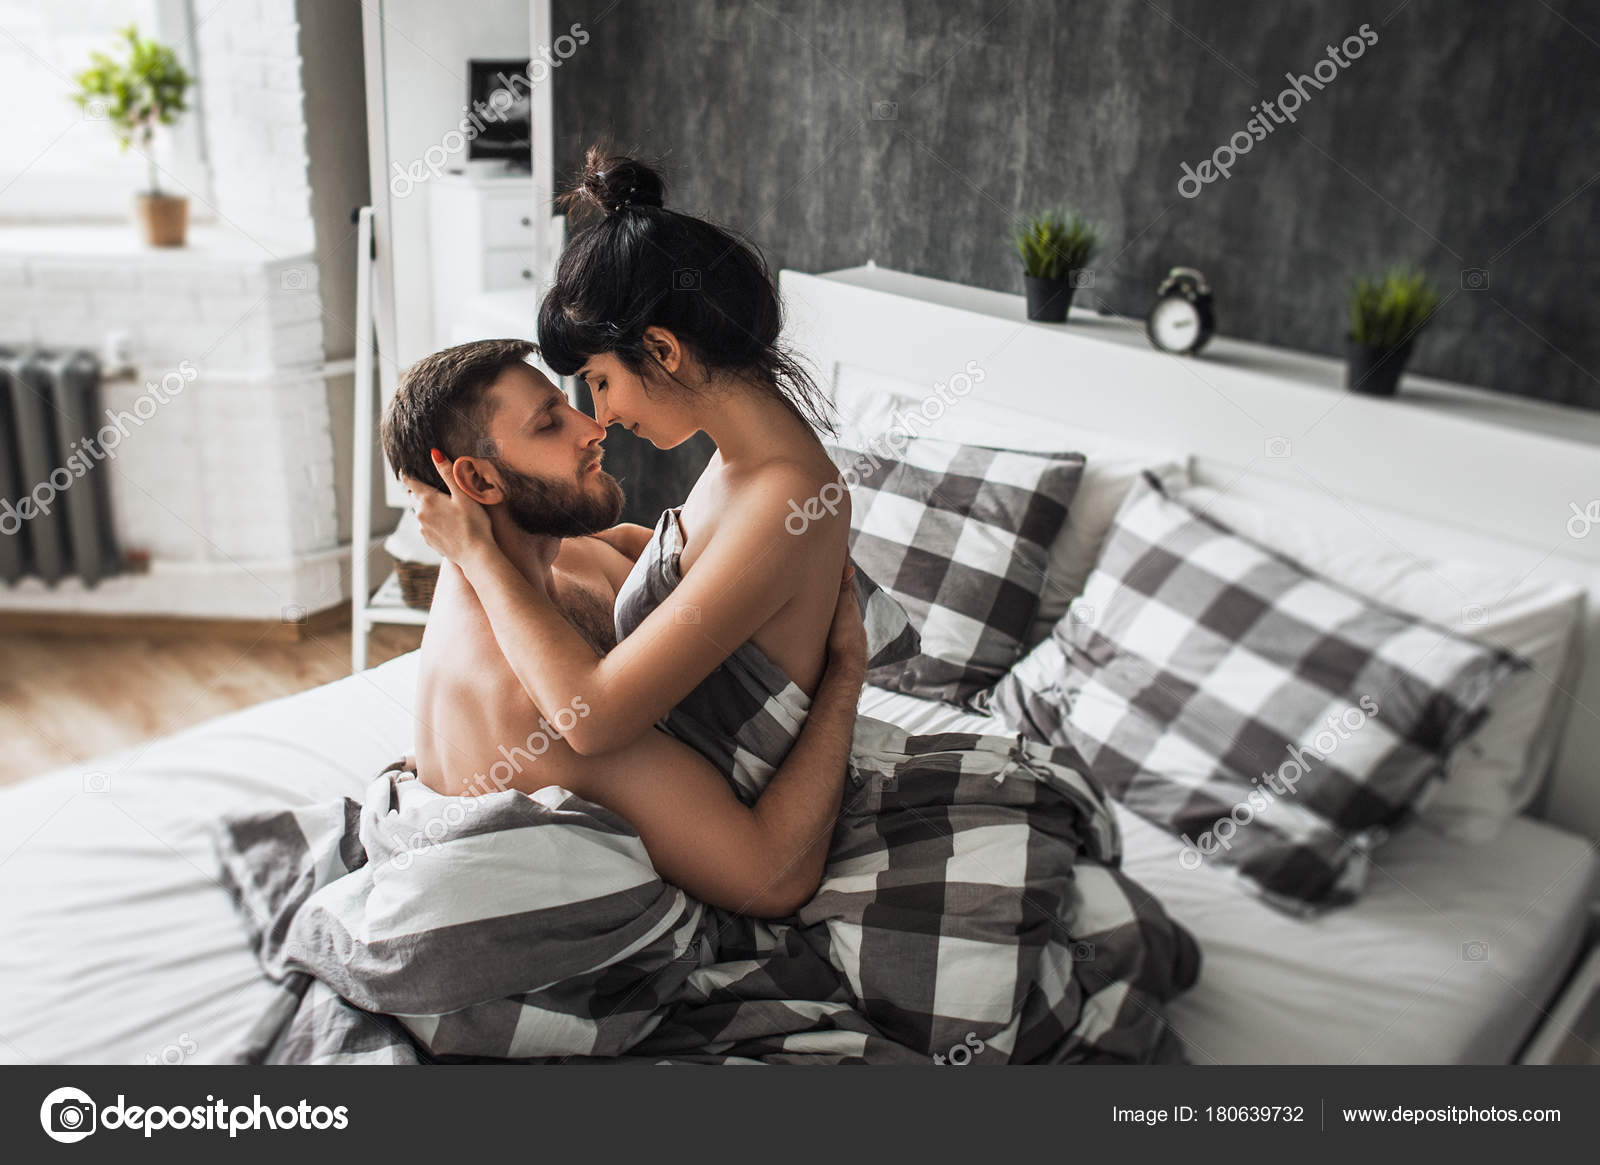 Man Woman Making Love Bed Loving Couple Bed Having Sex Stock Photo by ©sotnikov_mikhail@mail.ru 180639732